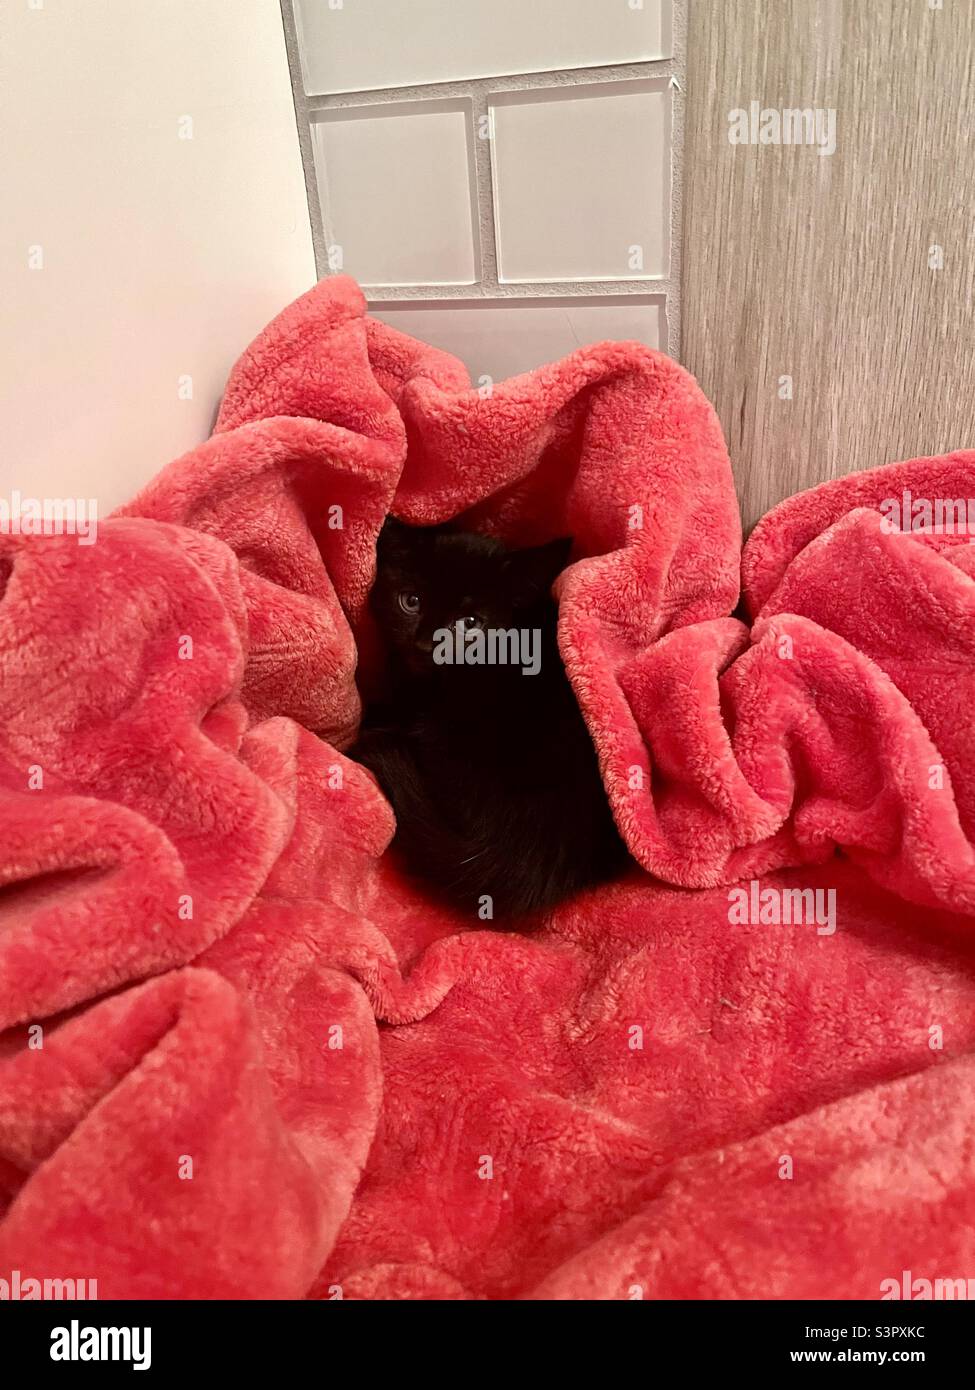 Tiny black kitten snuggled in pink blanket with bathroom tile wall behind, rescued but looks unsure even though comfortable Stock Photo